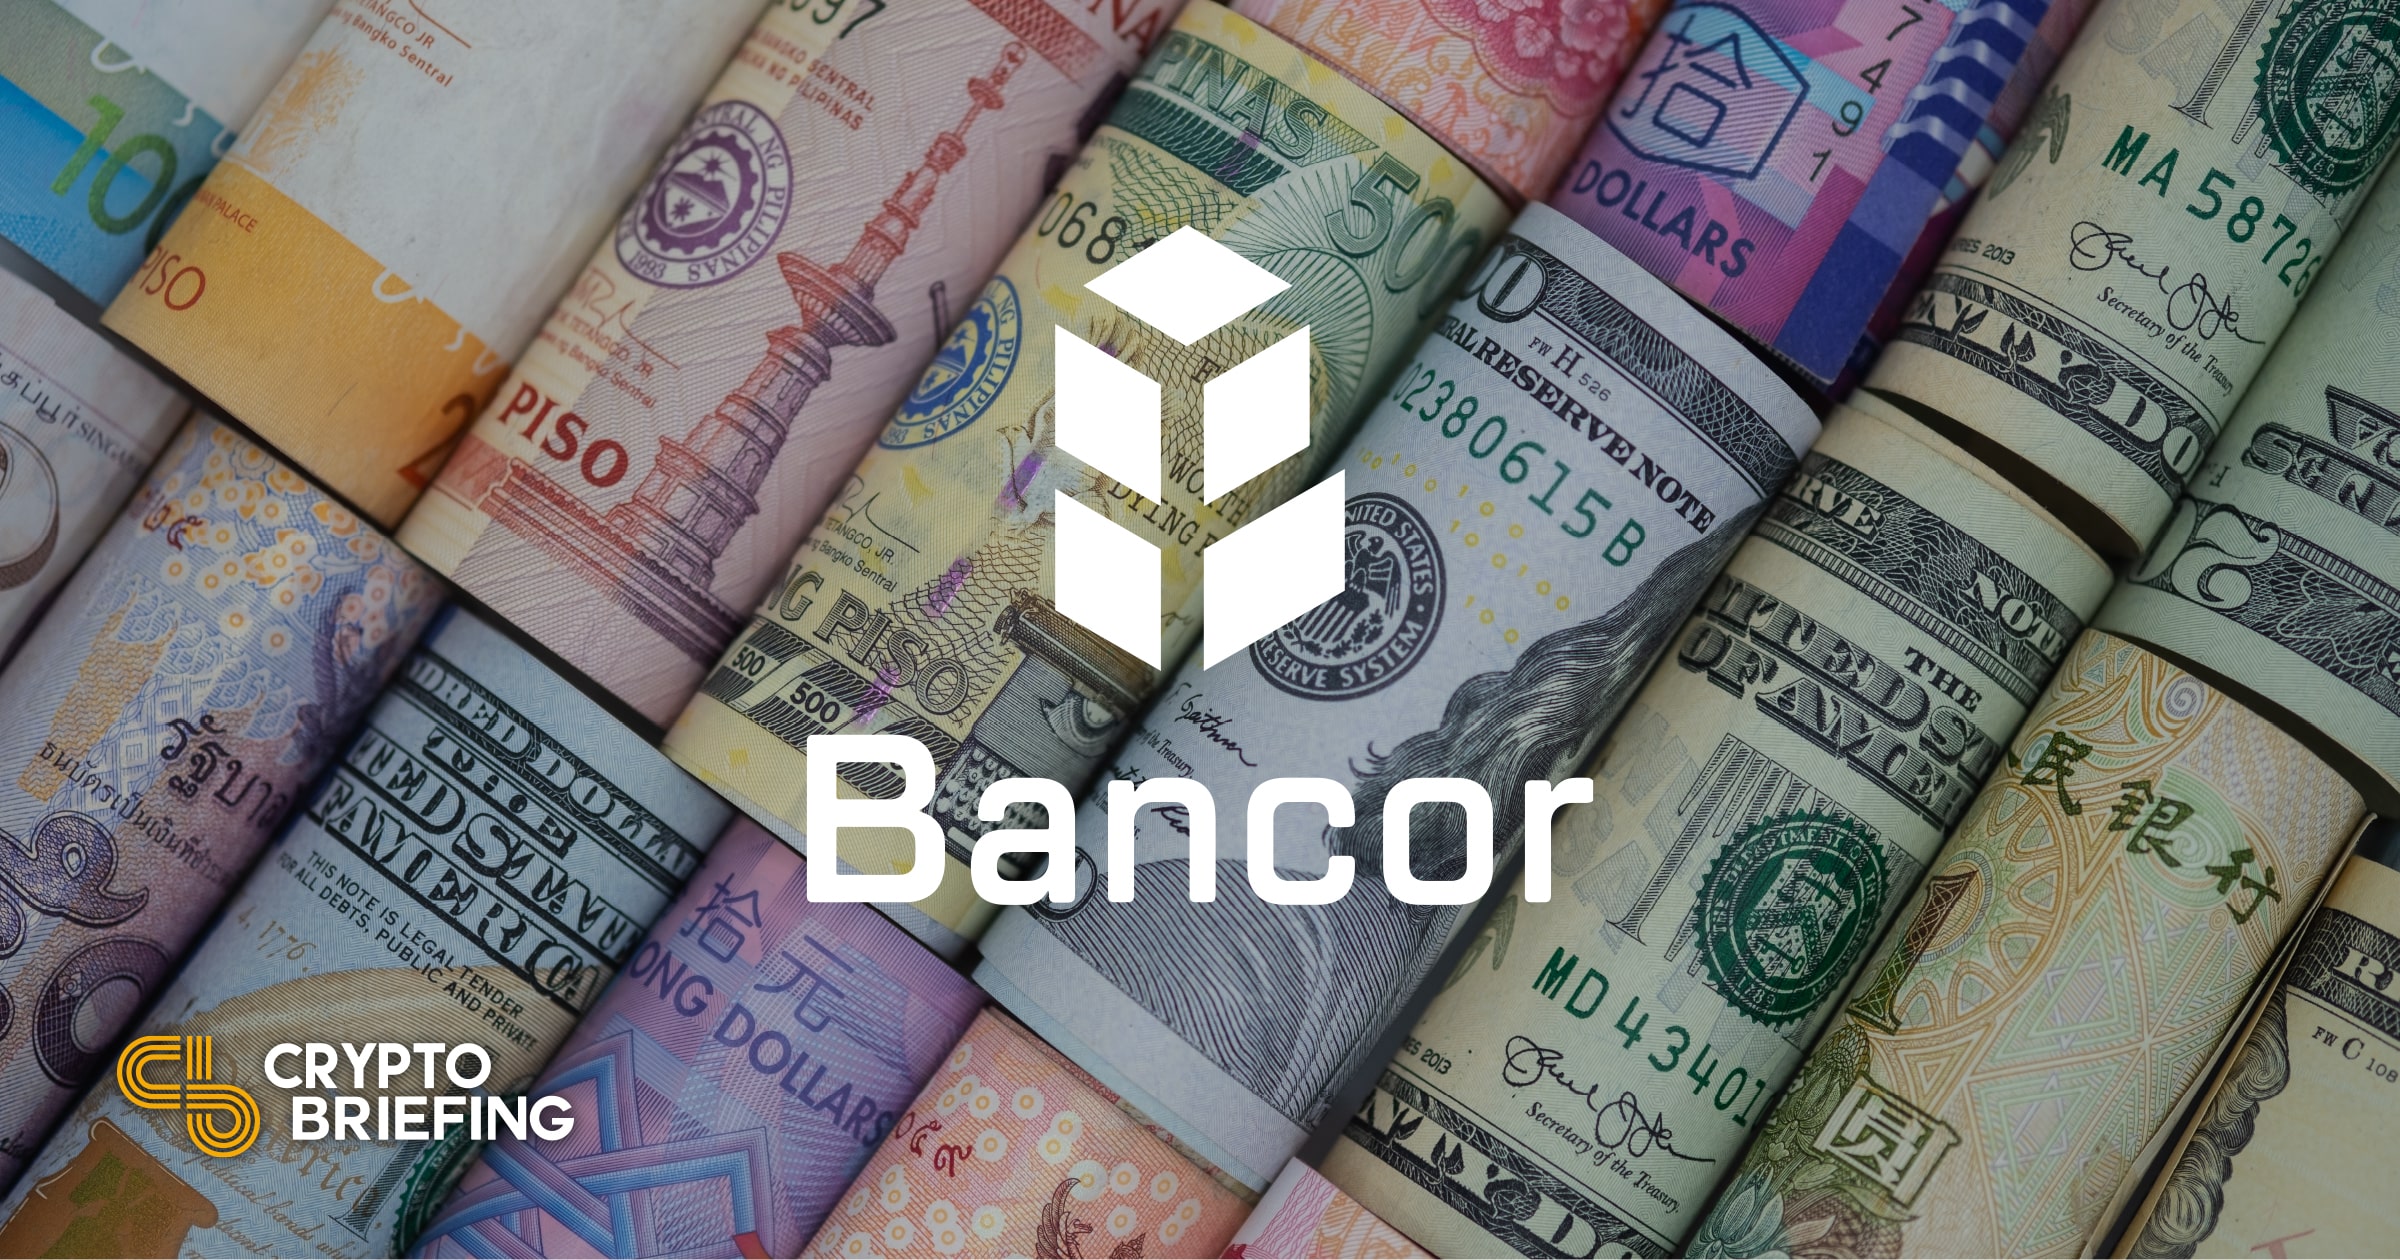 defi-project-spotlight-bancor-the-dark-horse-decentralized-exchange-crypto-briefing